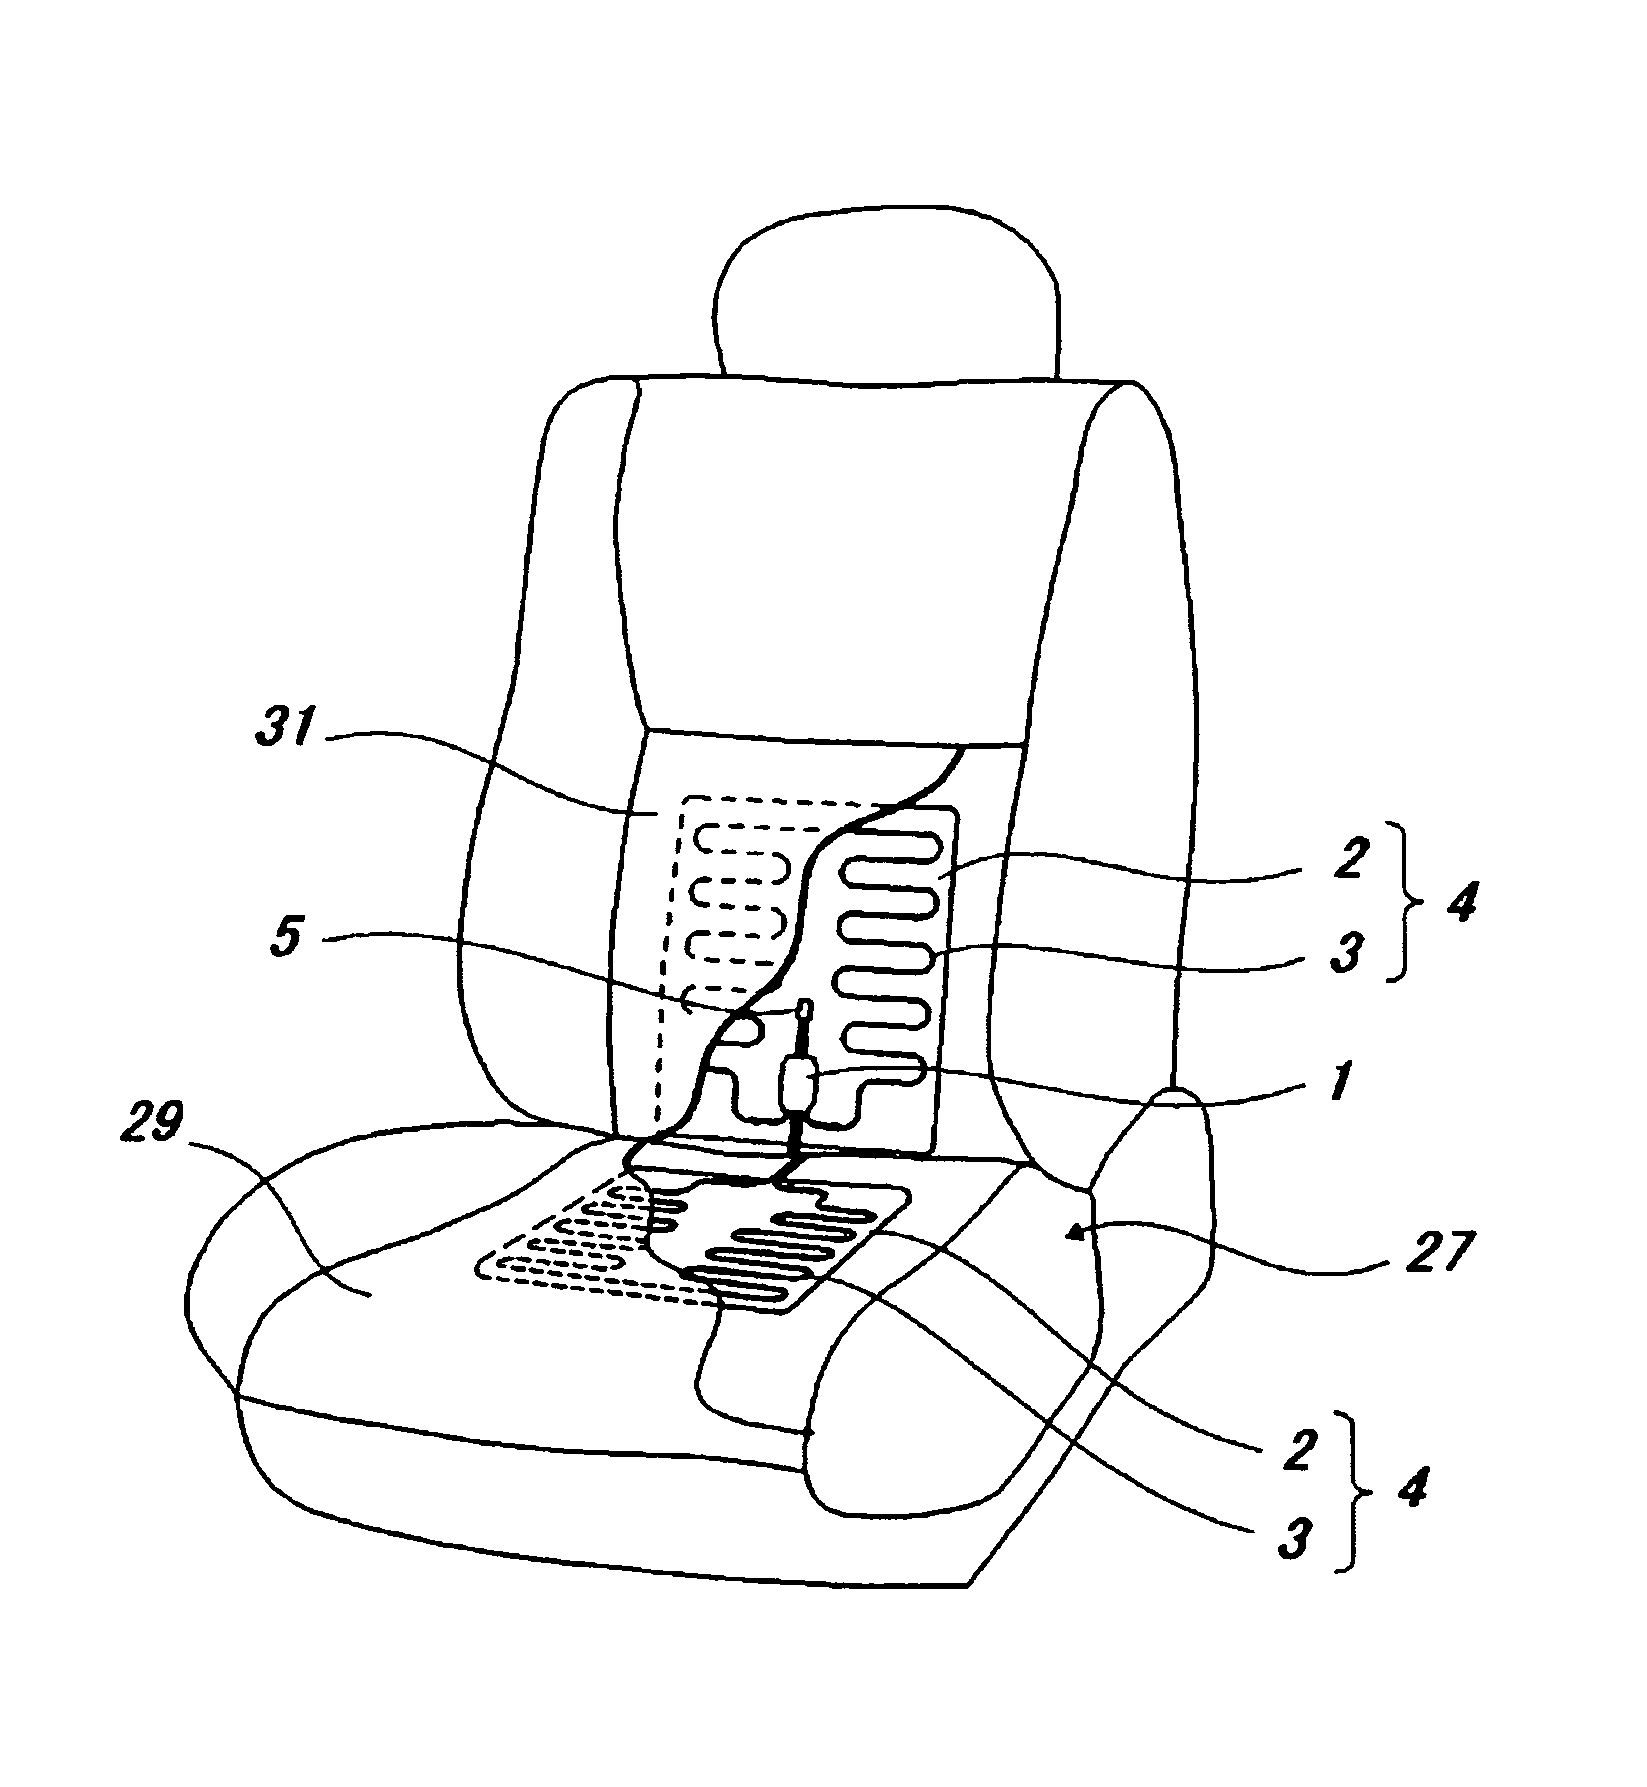 Heating device for seat